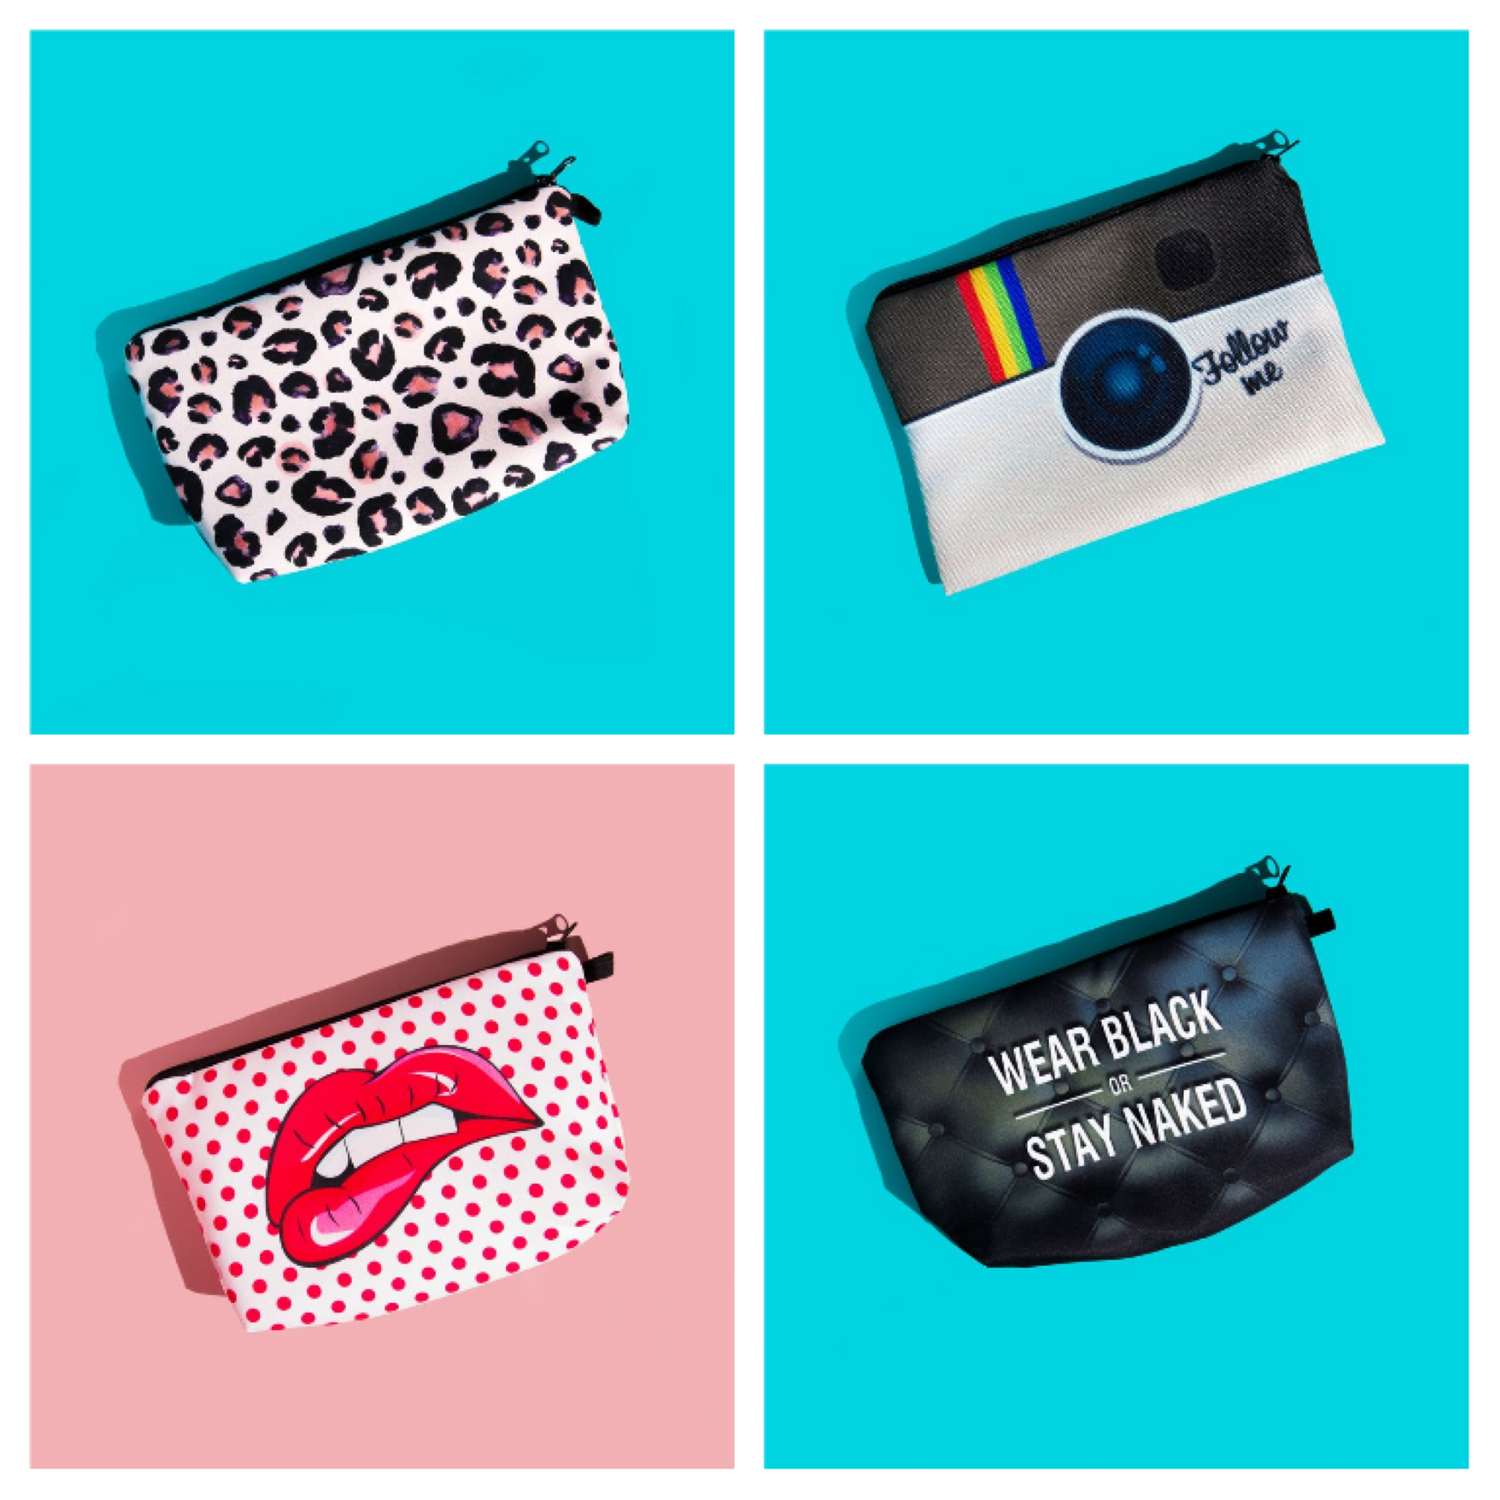 Image displays 4 different styles of pouches designed to store used or spare Period pants. Top left is pink leopard print, top right is a camera design with the words 'follow me'. Bottom left is white with red polka dots and a pair of red lips, bottom right is a black pouch displaying the words 'WEAR BLACK OF STAY NAKED' in white letters.